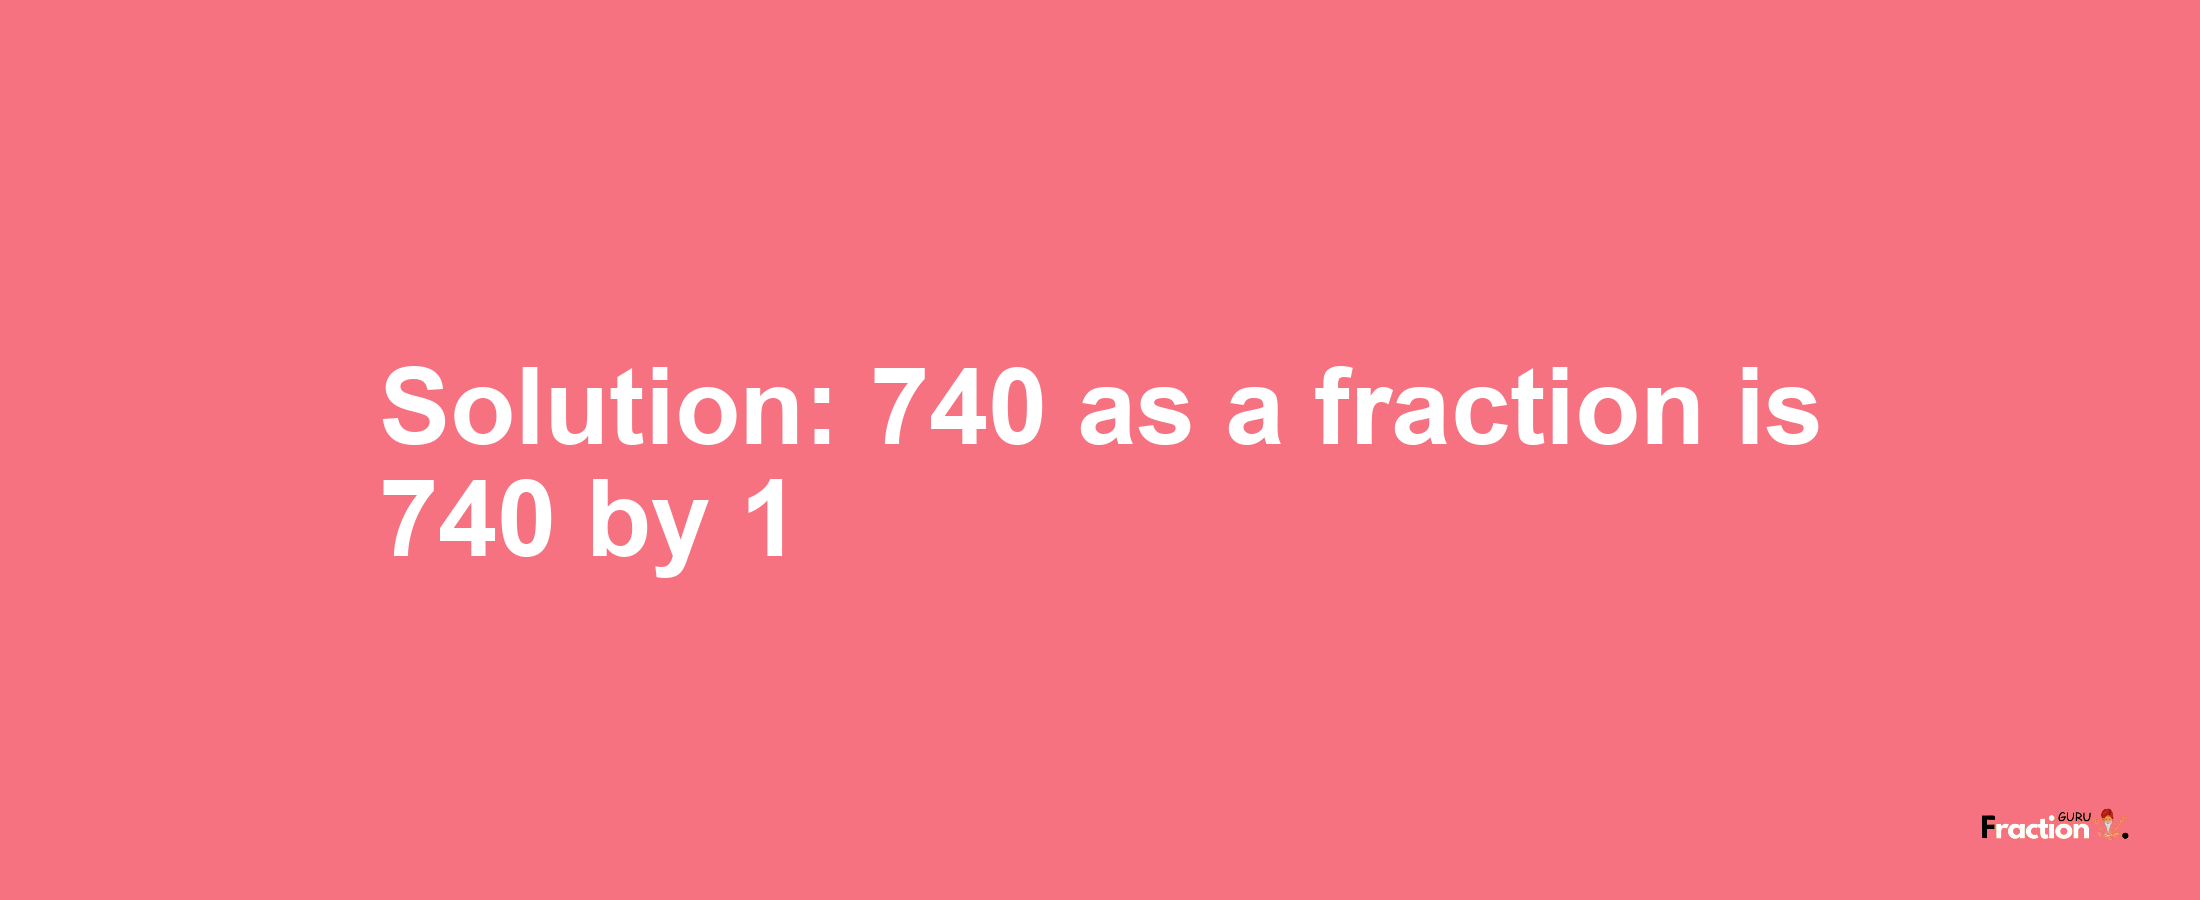 Solution:740 as a fraction is 740/1